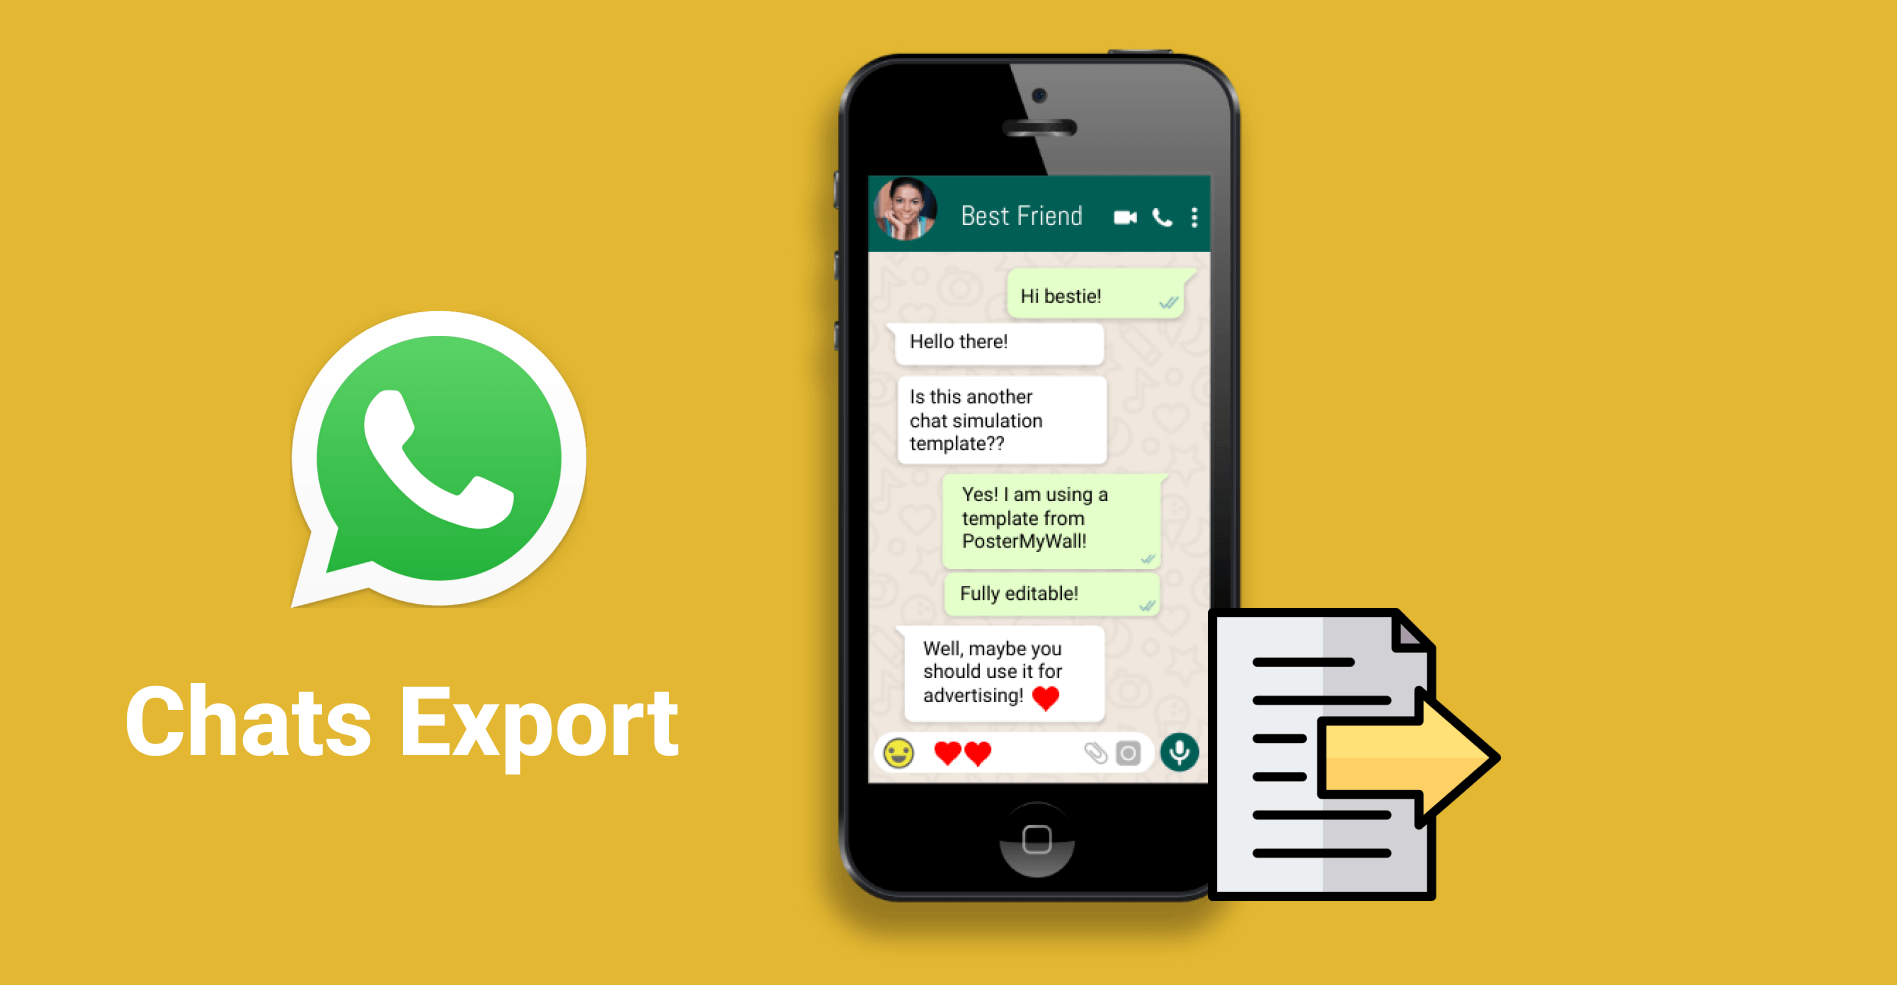 whatsapp-hidden-features-you-should-know-16